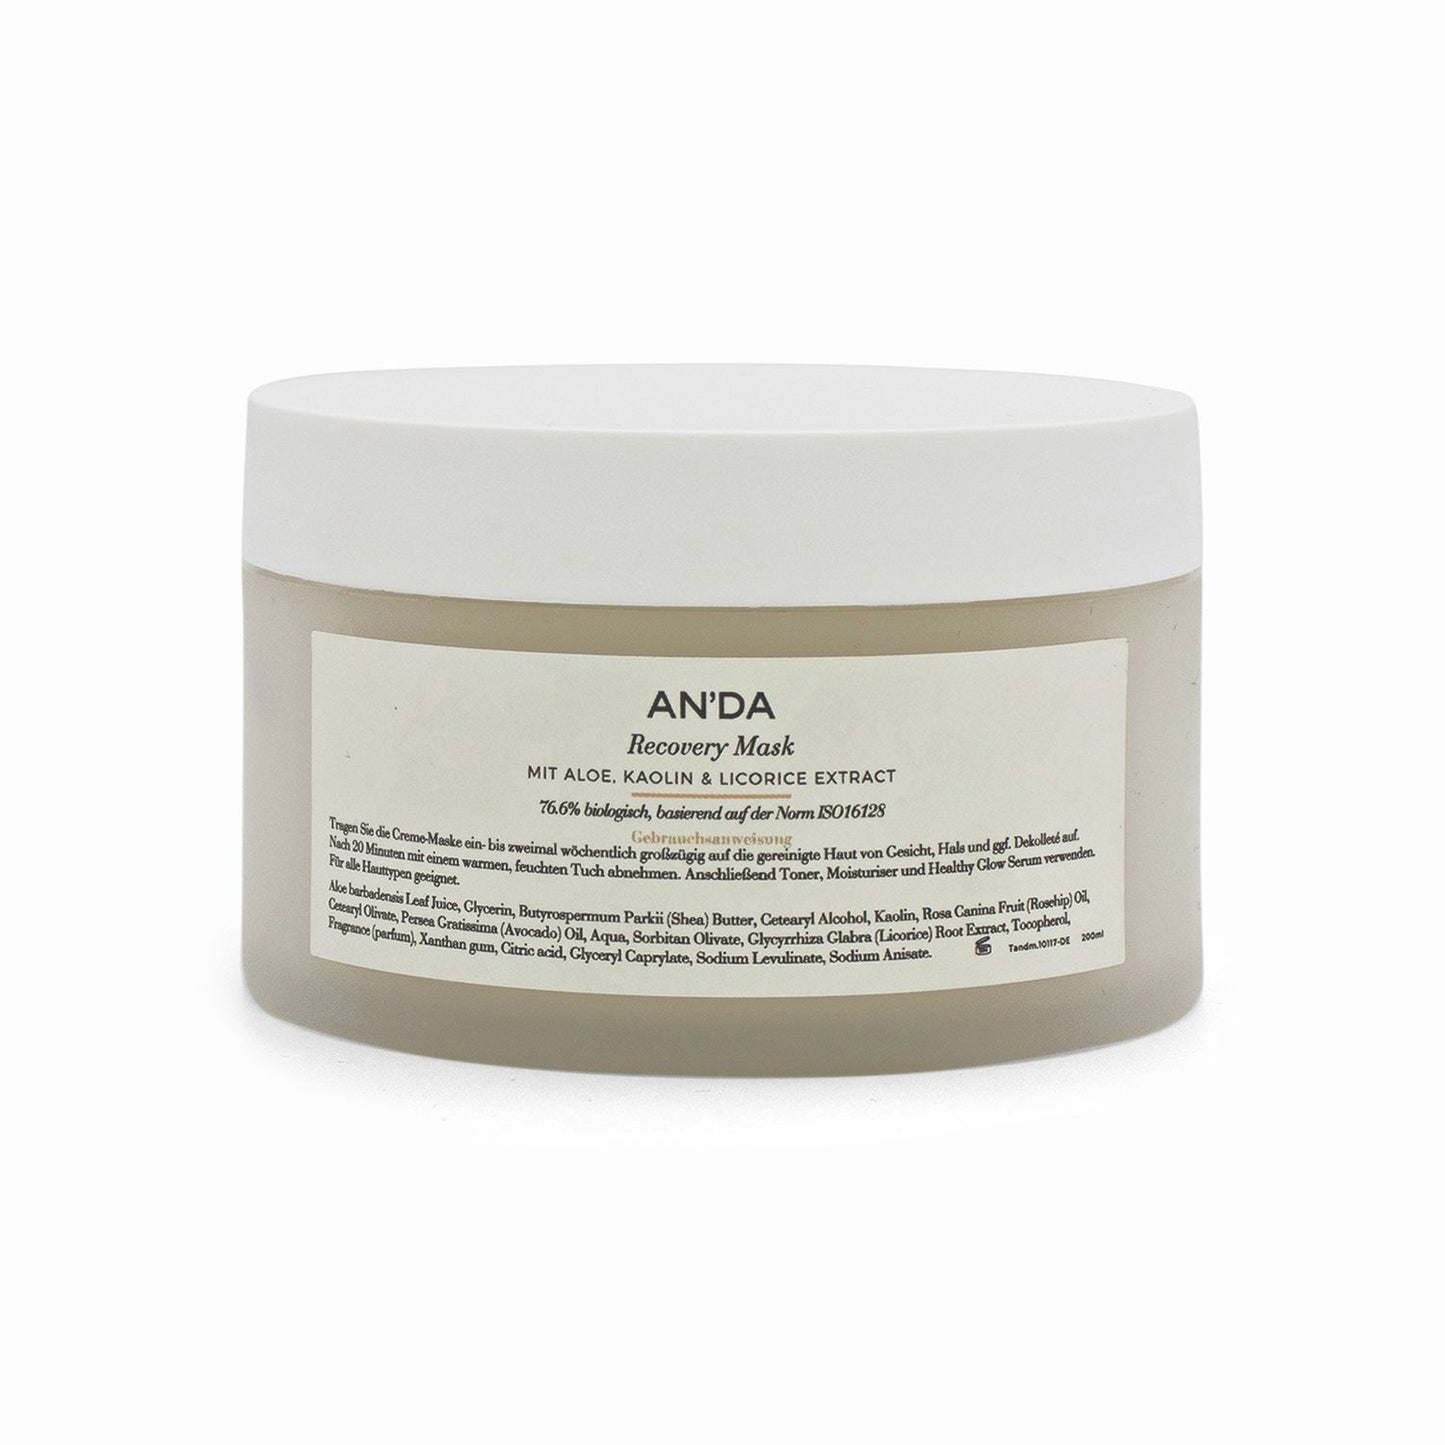 AN'DA Recovery Face Mask 200ml For All Skin Types - Missing Box